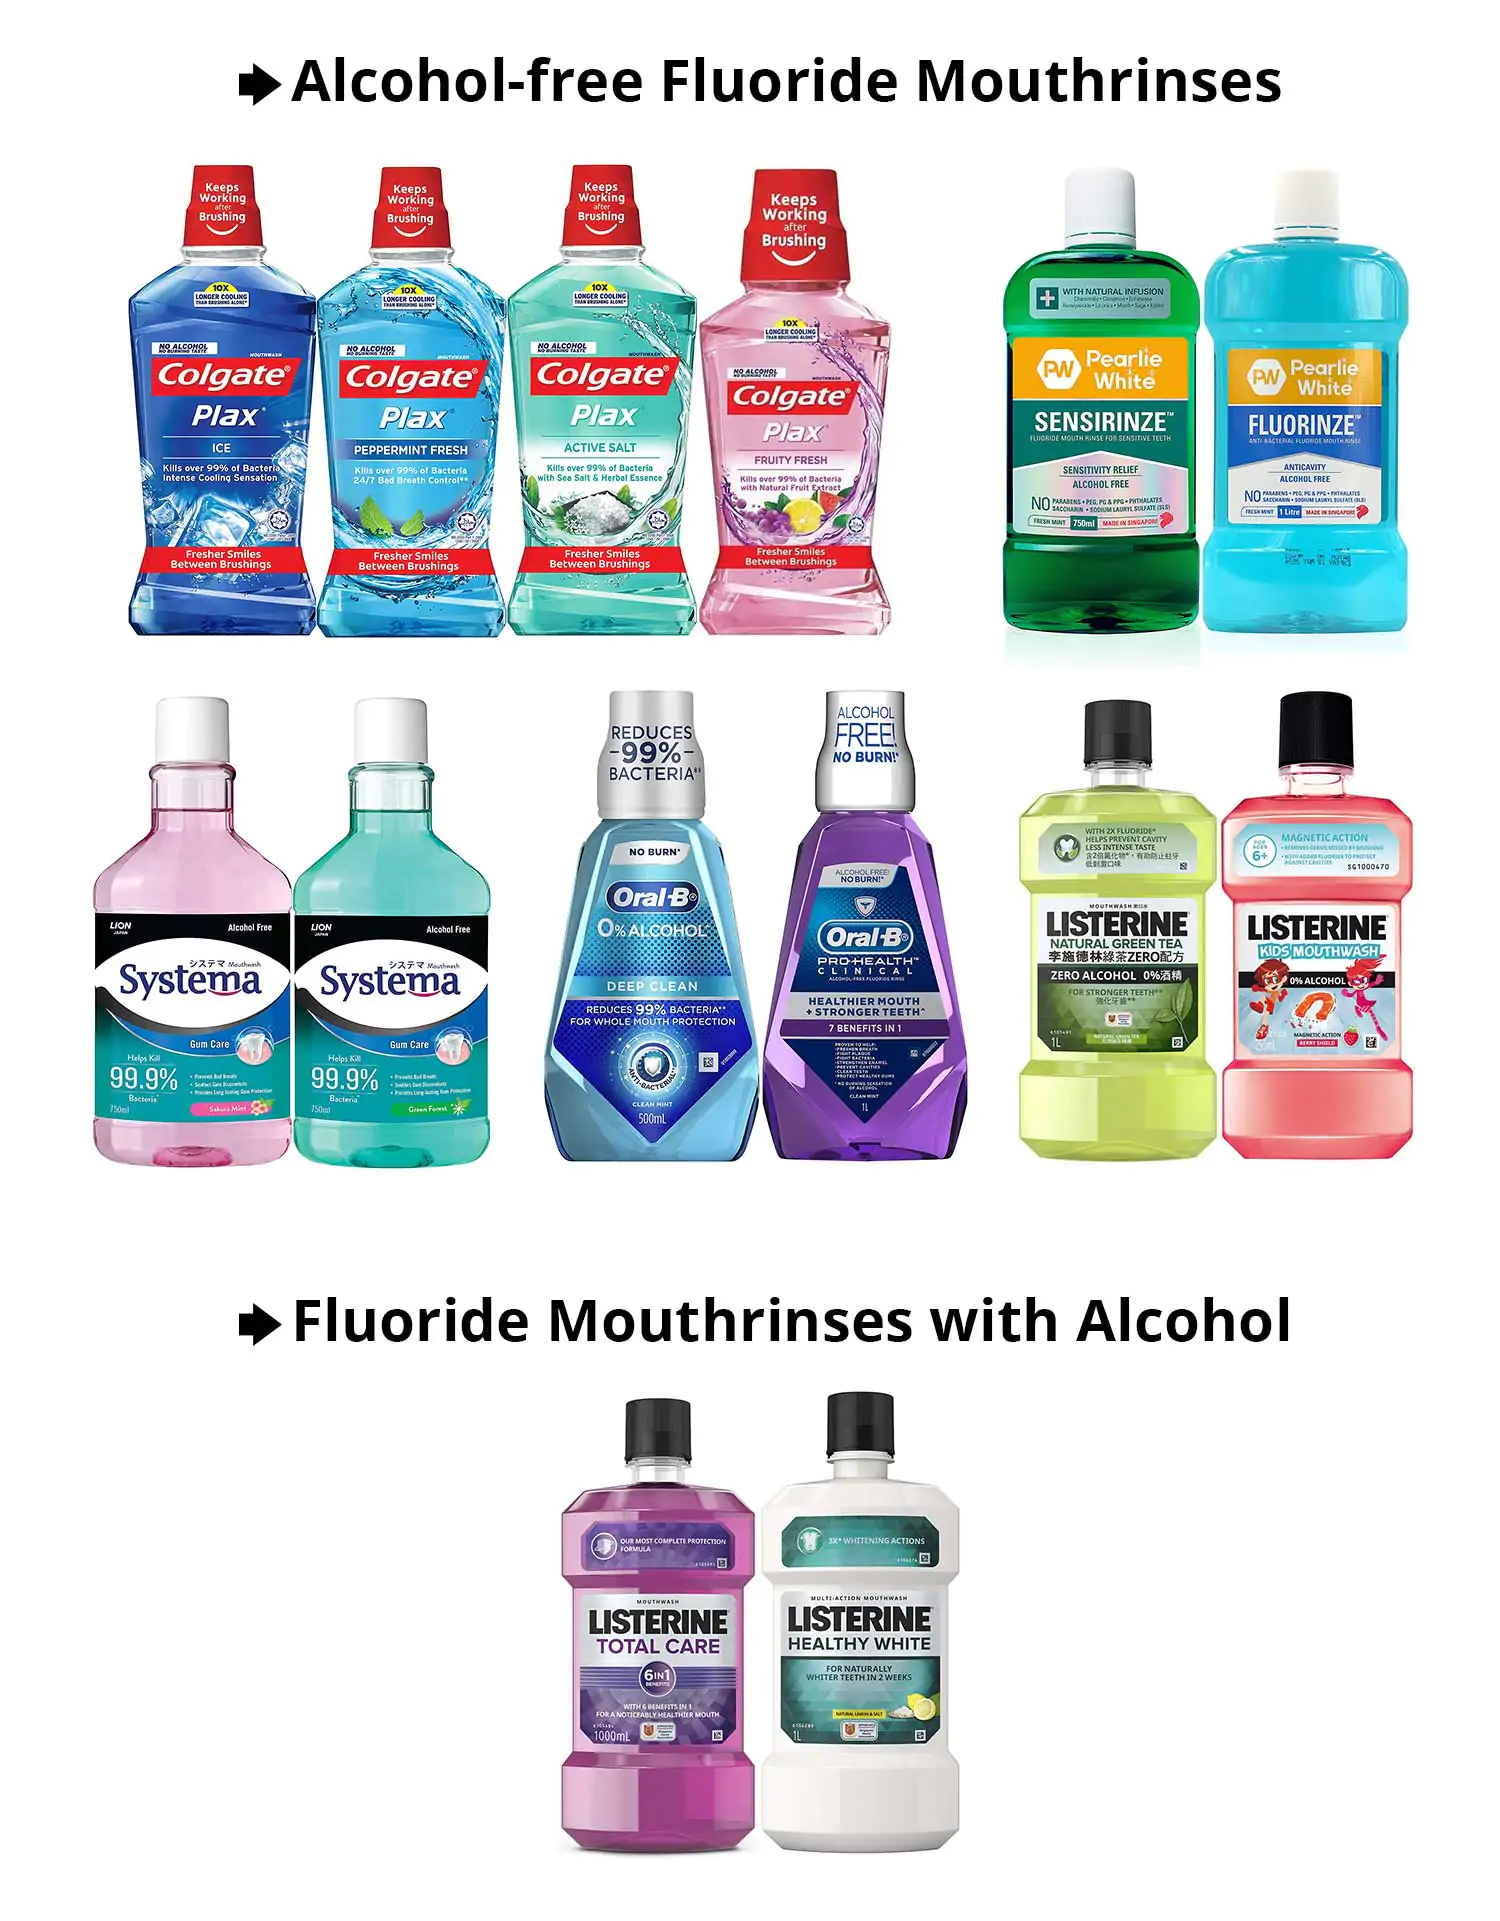 Fluoridated mouth rinses